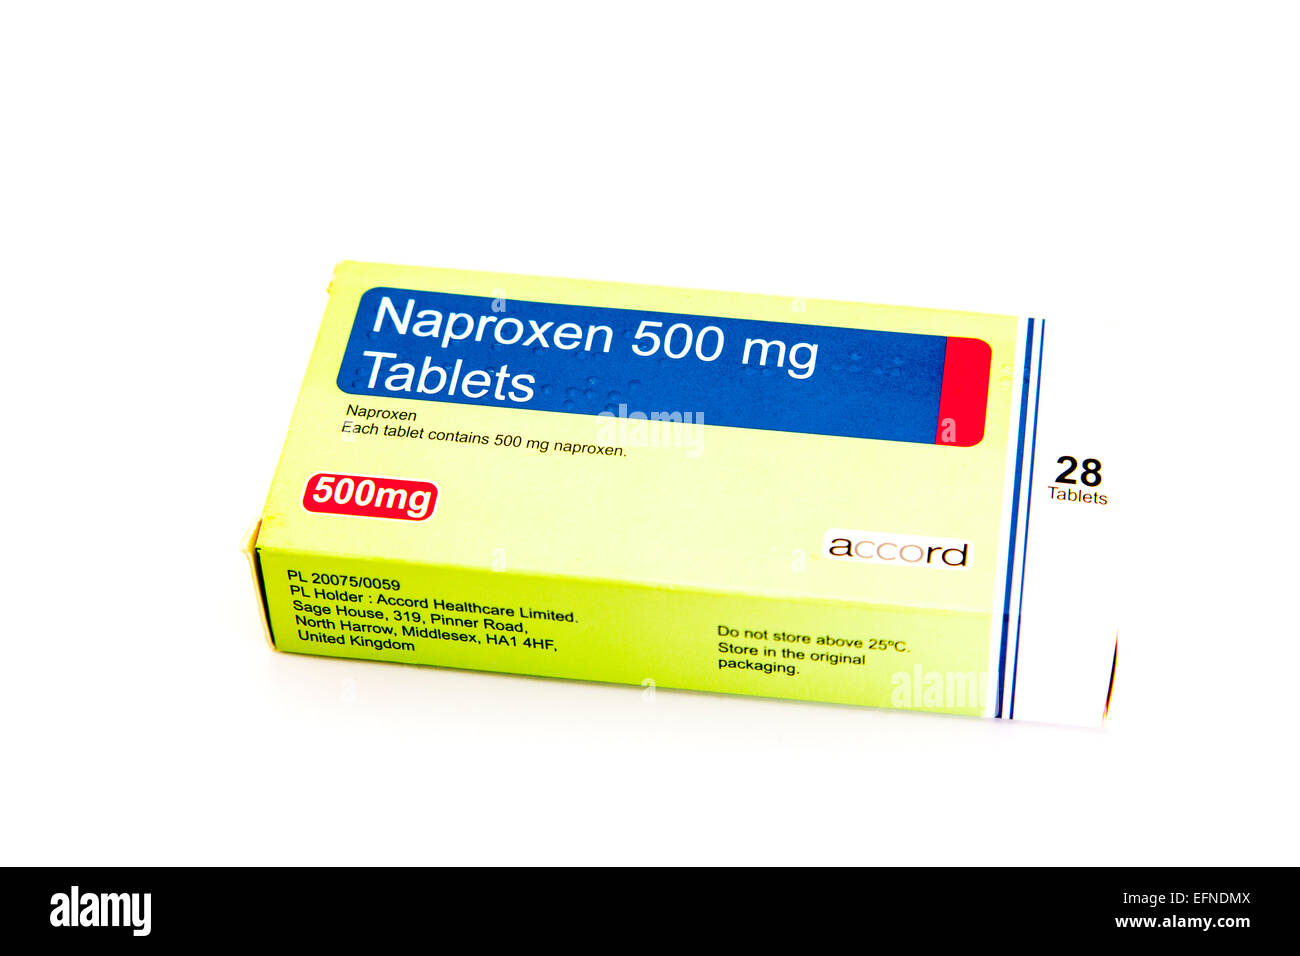 Naproxen 500mg enteric coated tablets a non-steroidal anti-inflammatory drug (NSAID)  cut out white background copy space Stock Photo